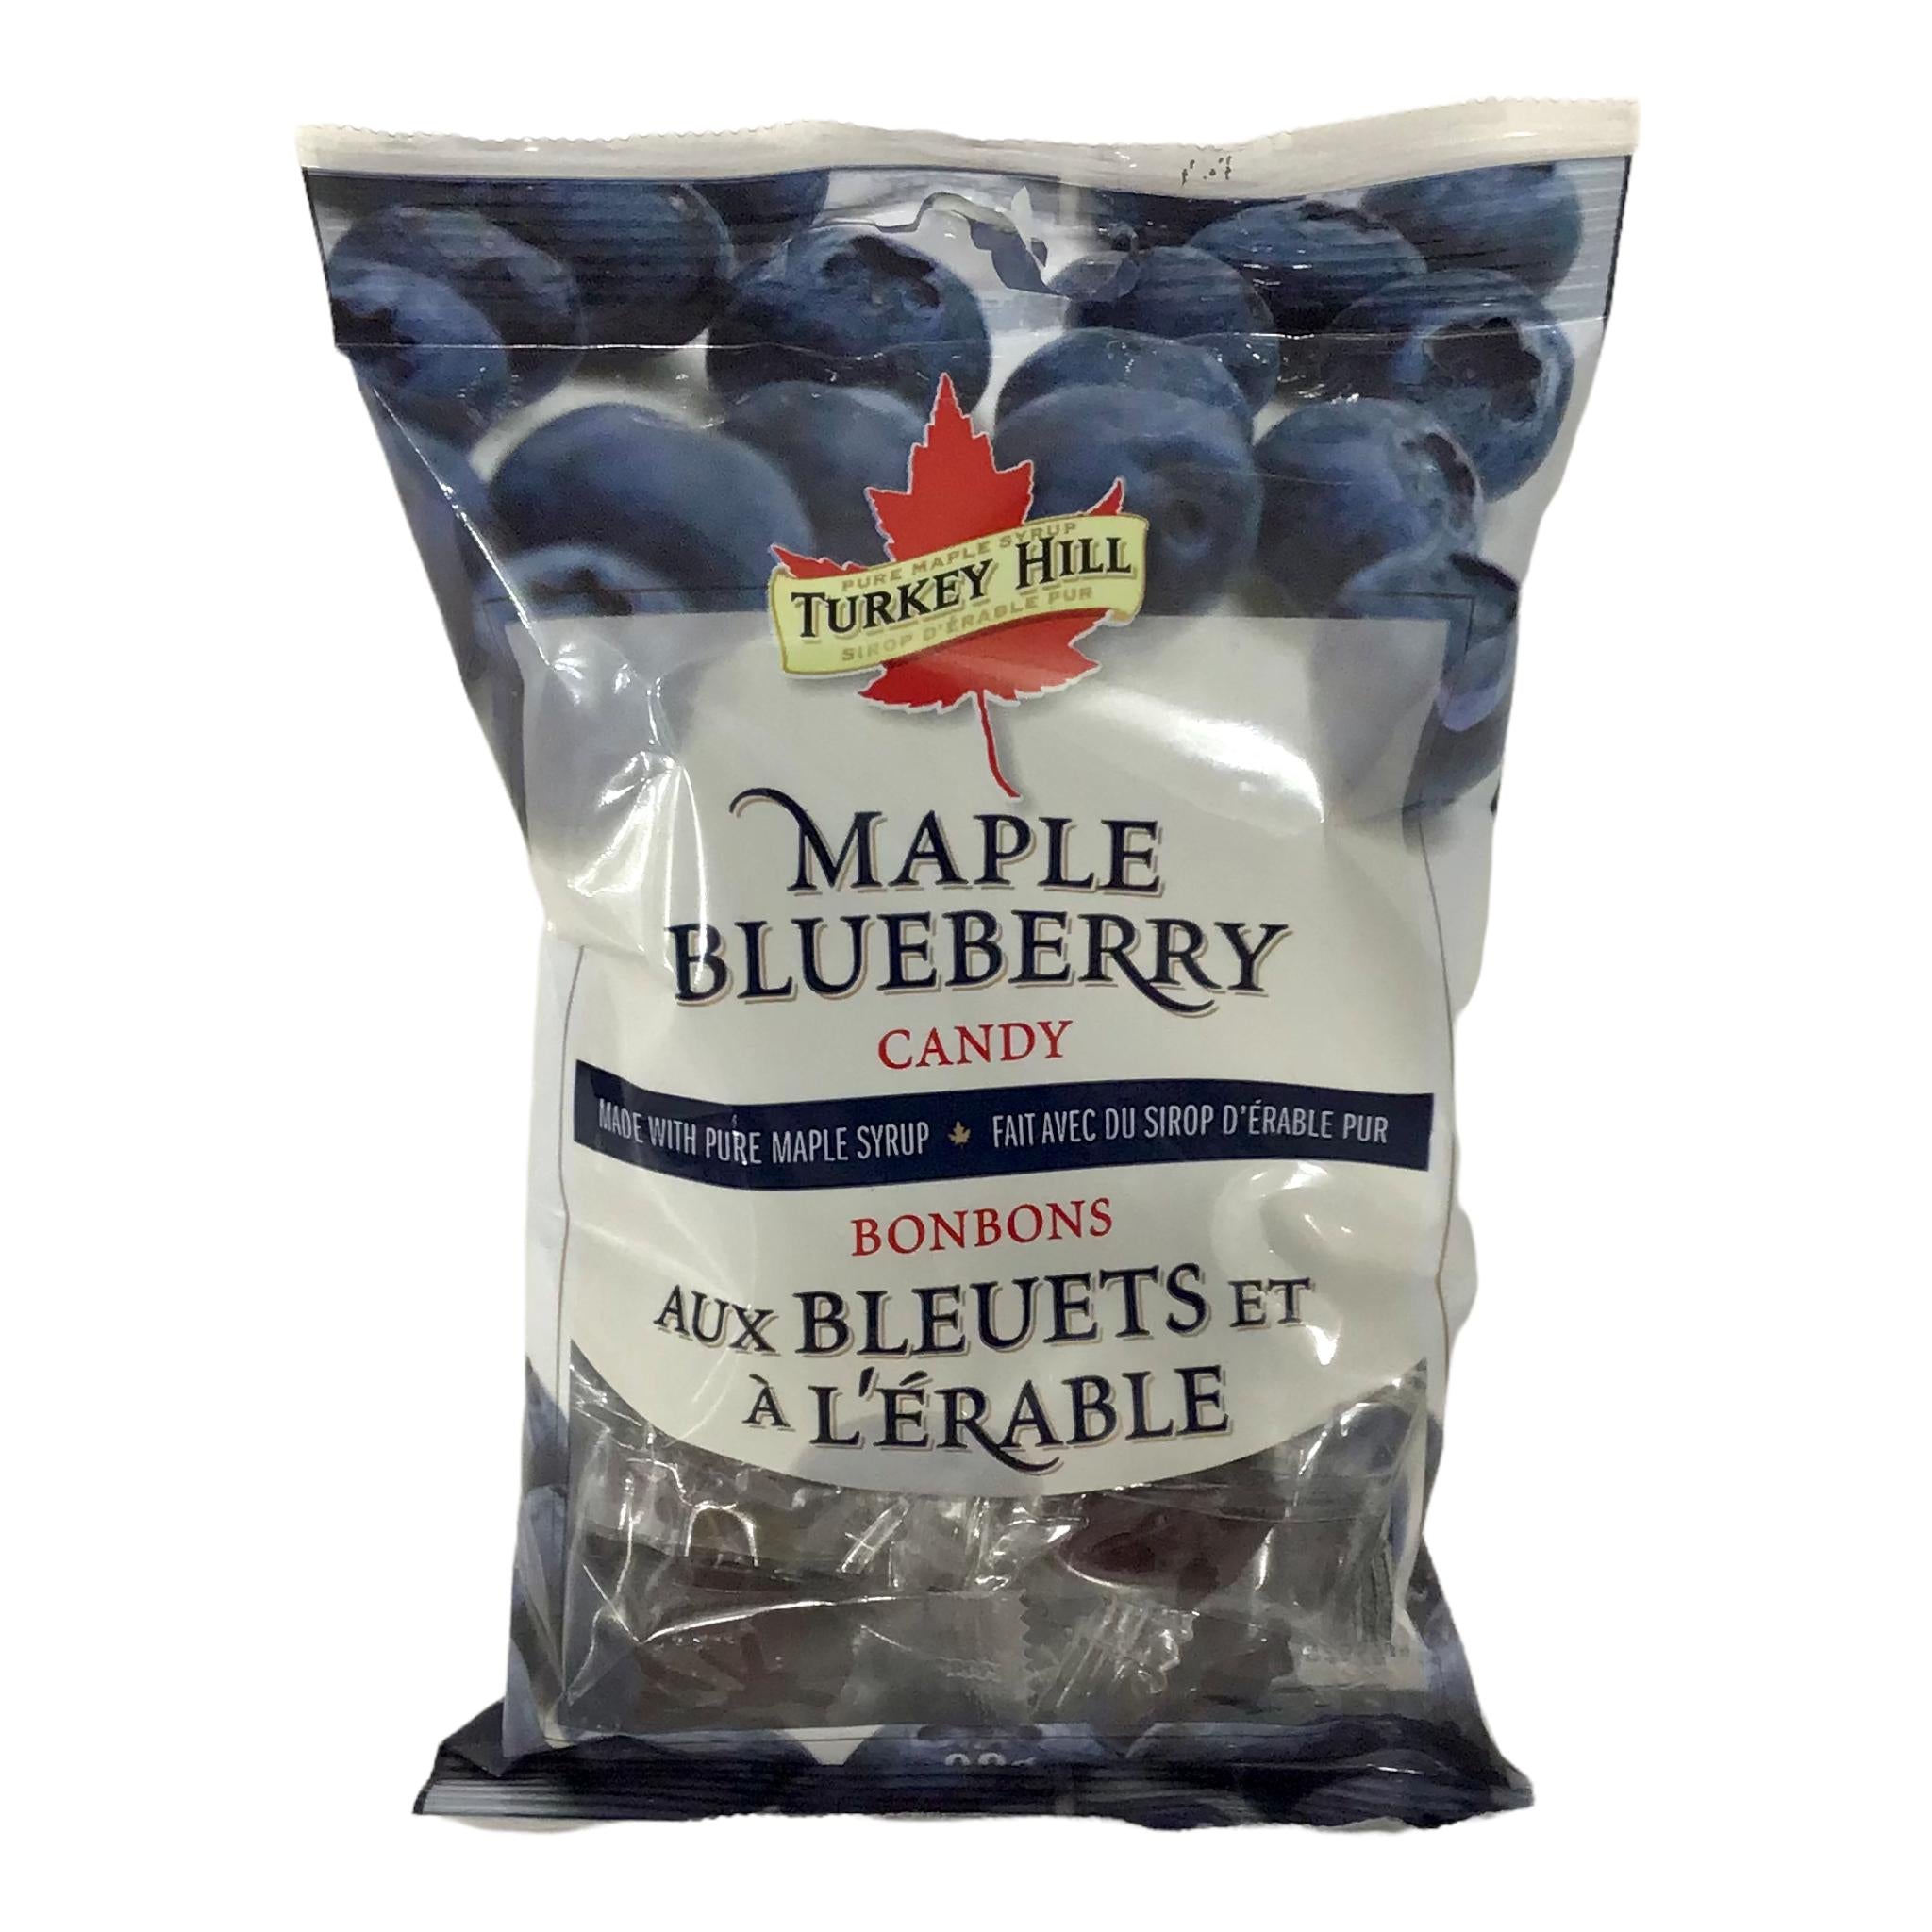 Canadian Maple Blueberry Candy - Turkey Hill 90g Pack Canada Souvenir Gift